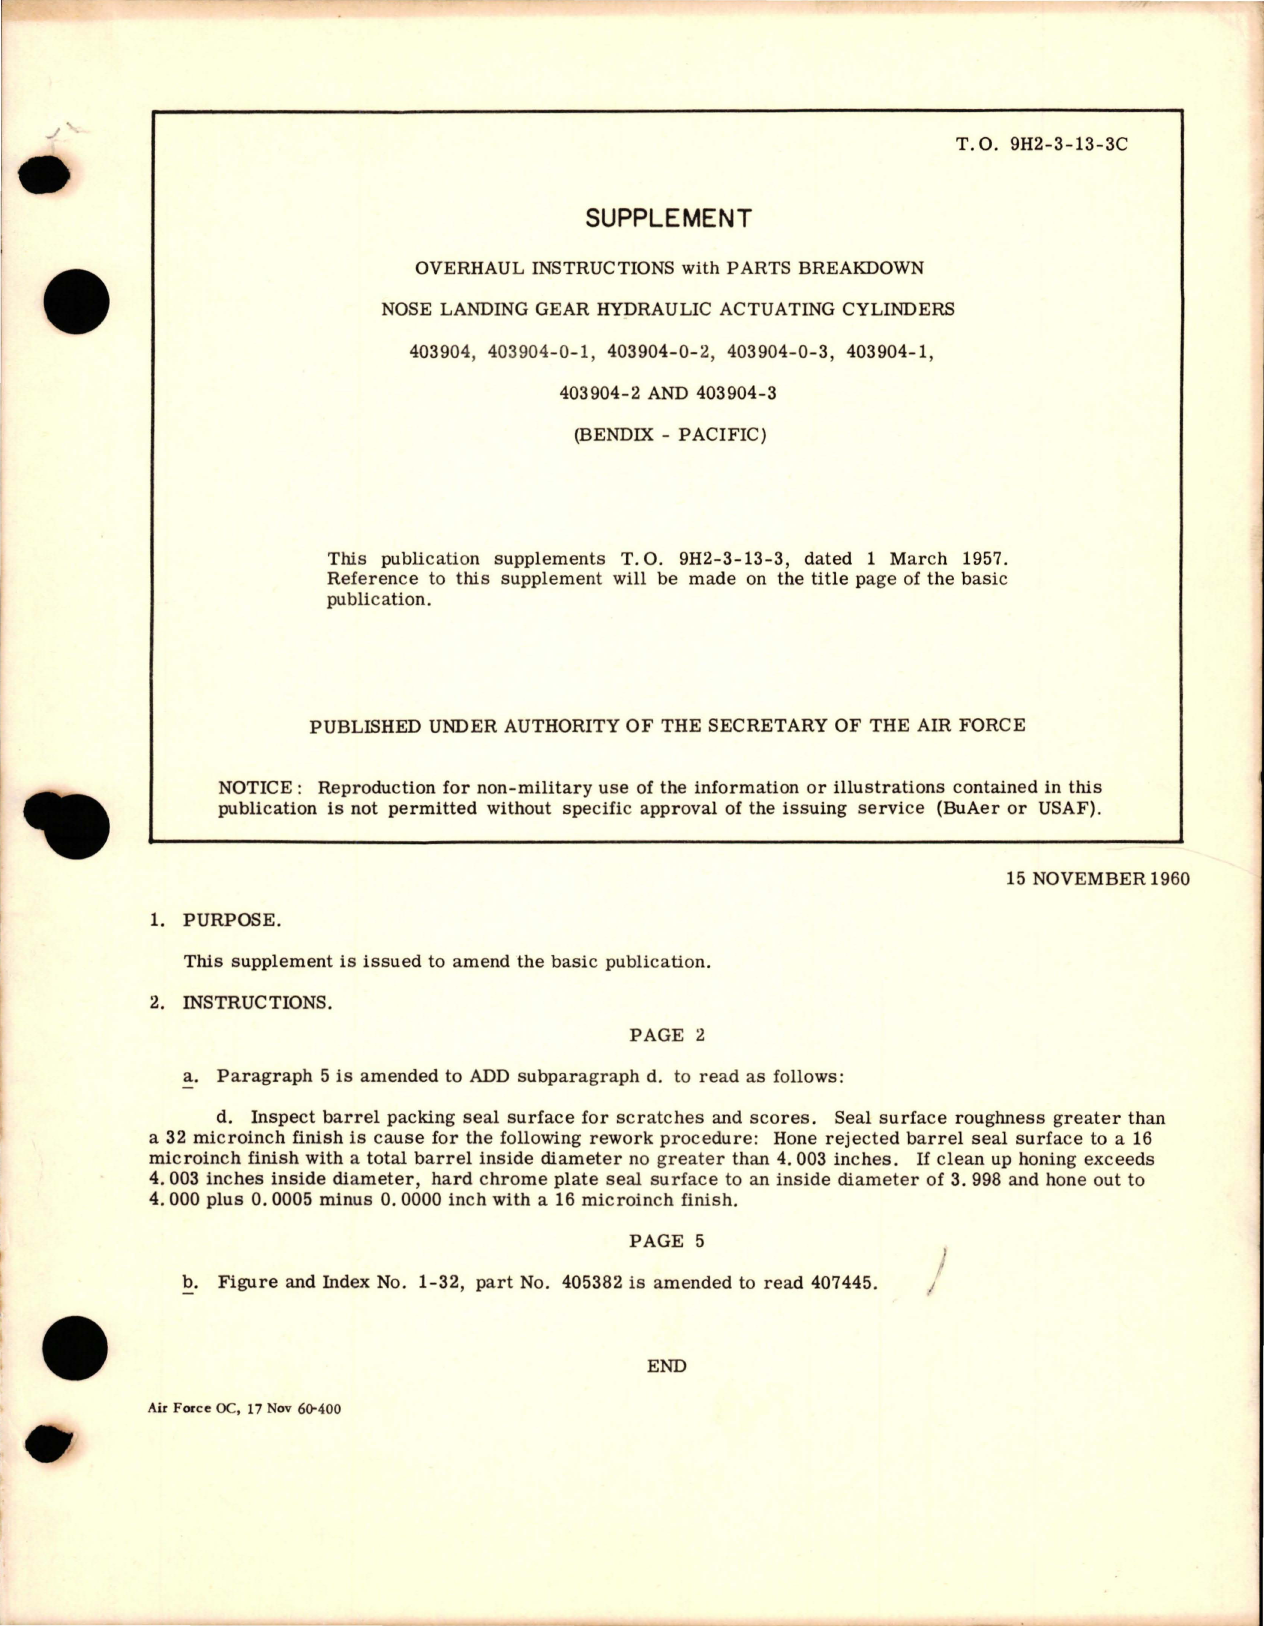 Sample page 1 from AirCorps Library document: Supplement to Overhaul Instructions with Parts Breakdown for Nose Landing Gear Hydraulic Actuating Cylinders